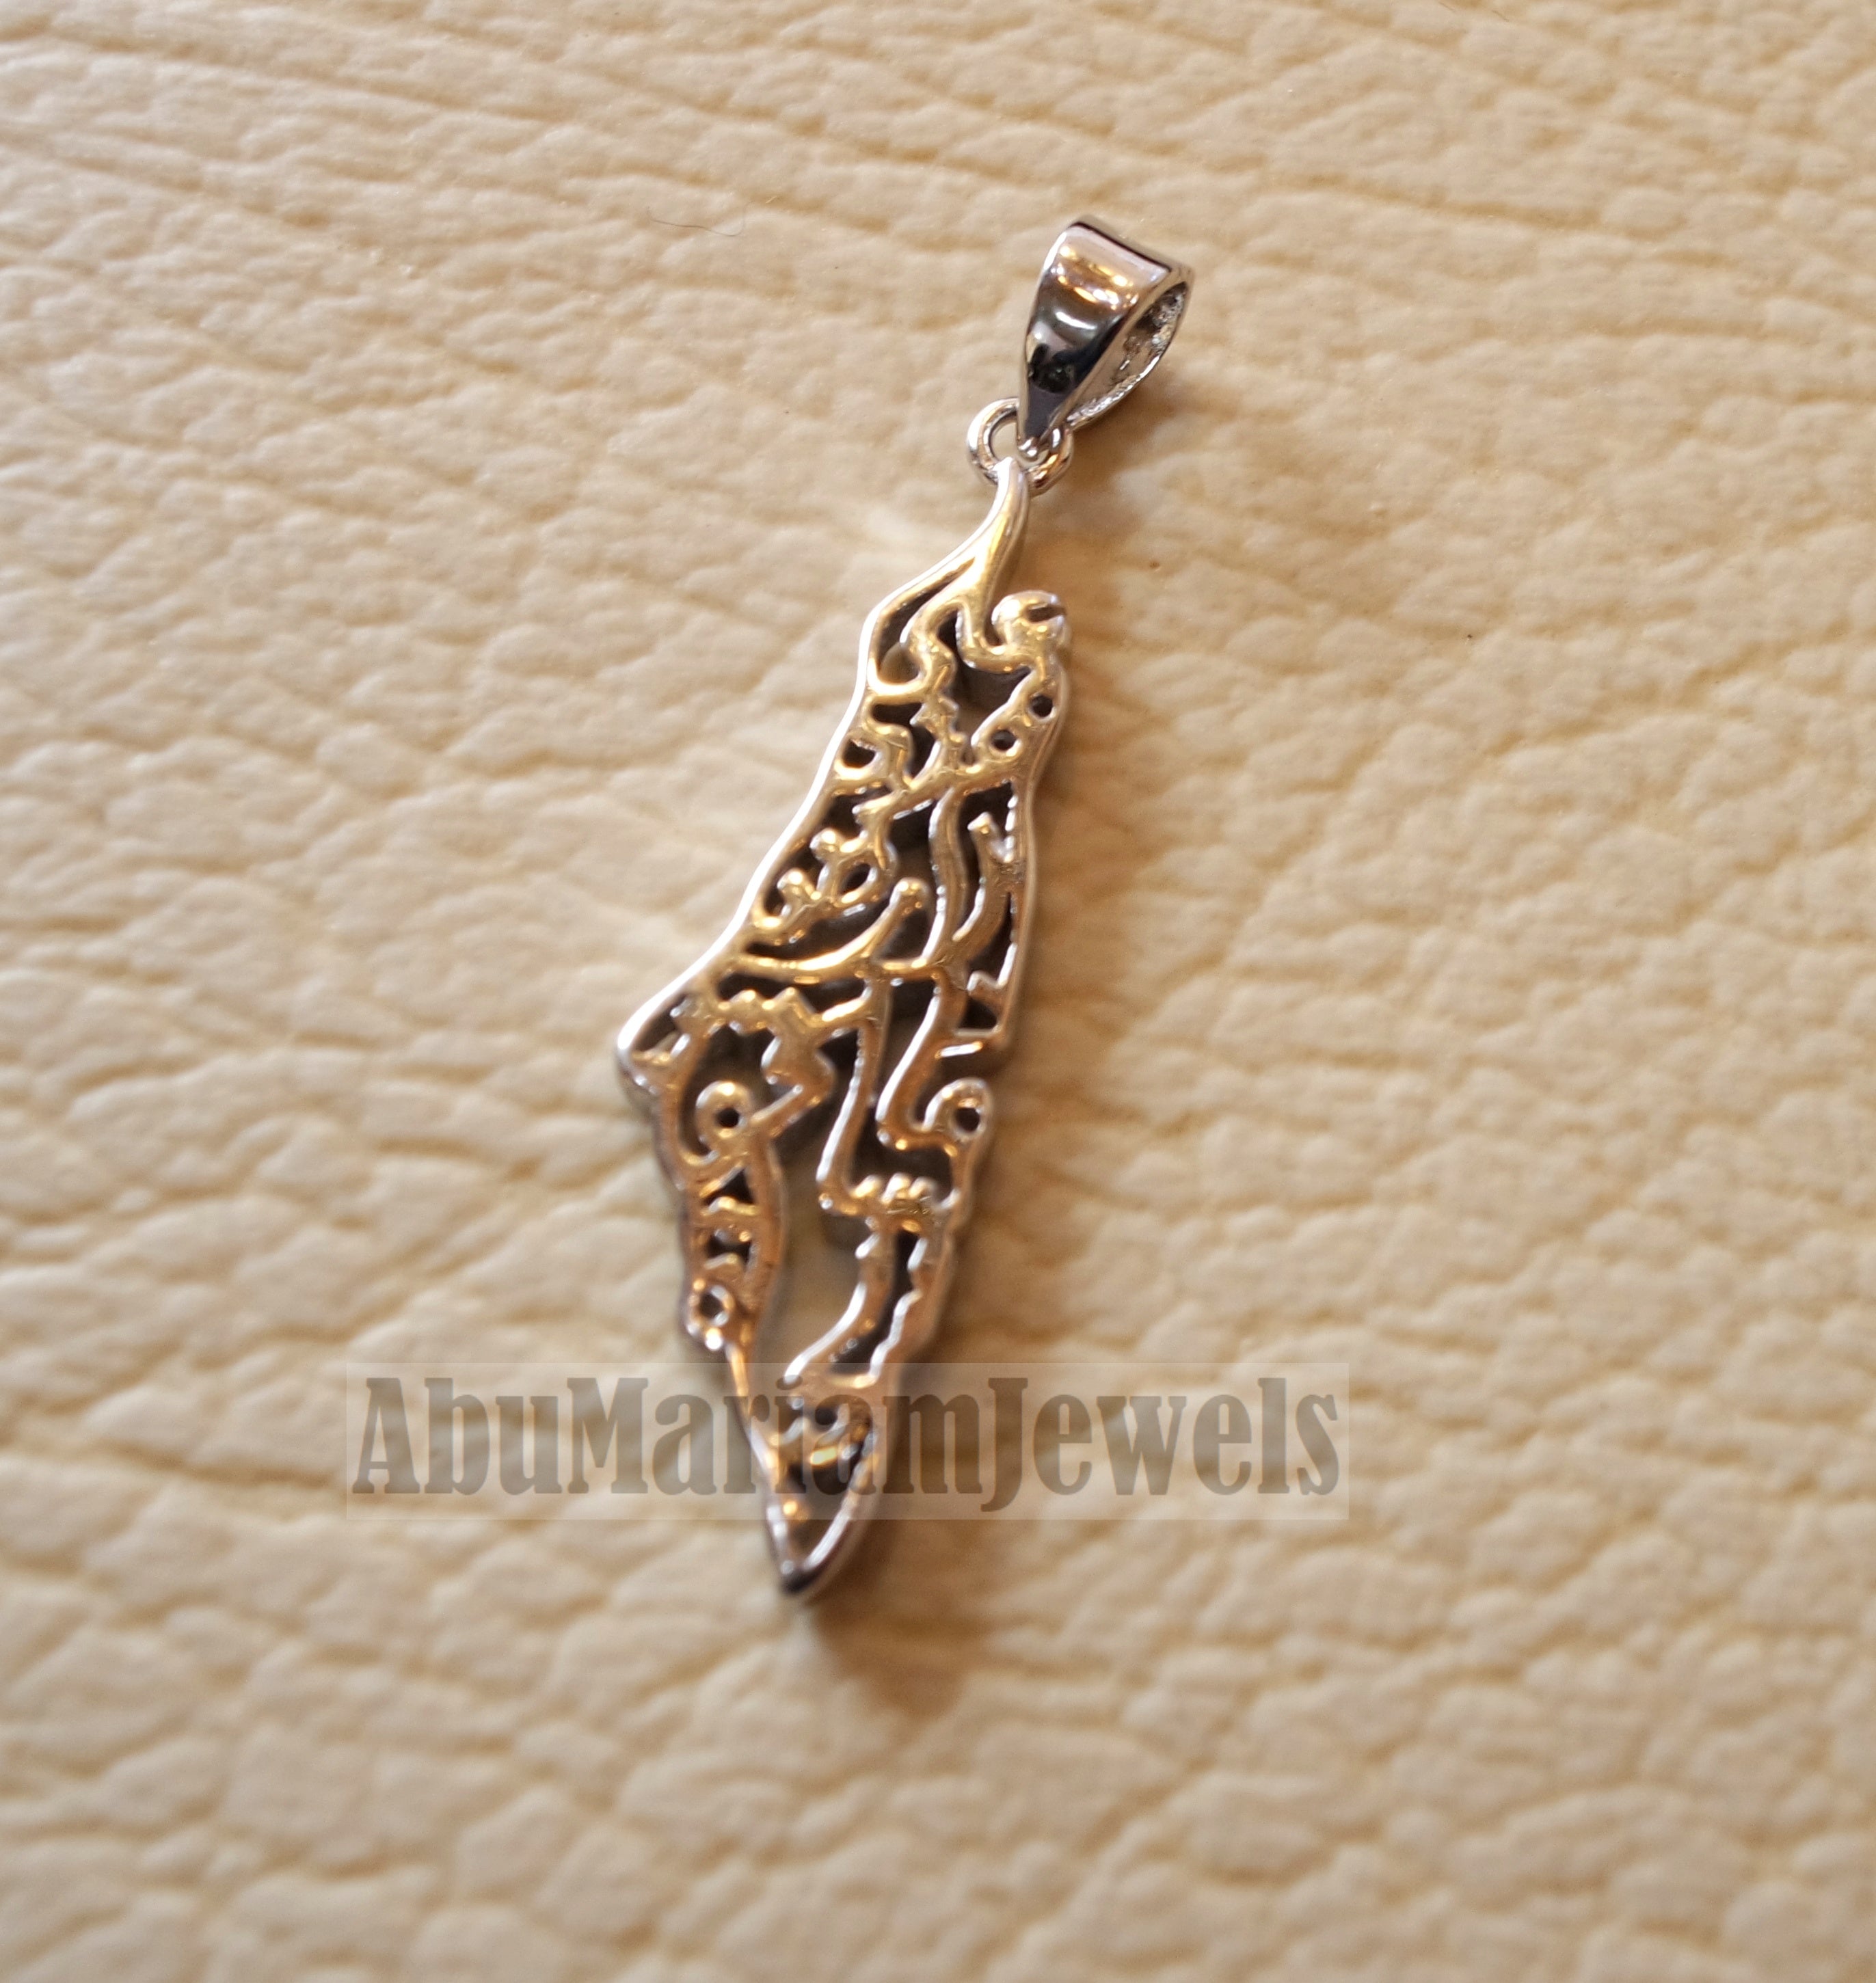 Palestine map very small pendant with famous poem verse sterling silver 925 k high quality jewelry arabic fast shipping خارطه و علم فلسطين